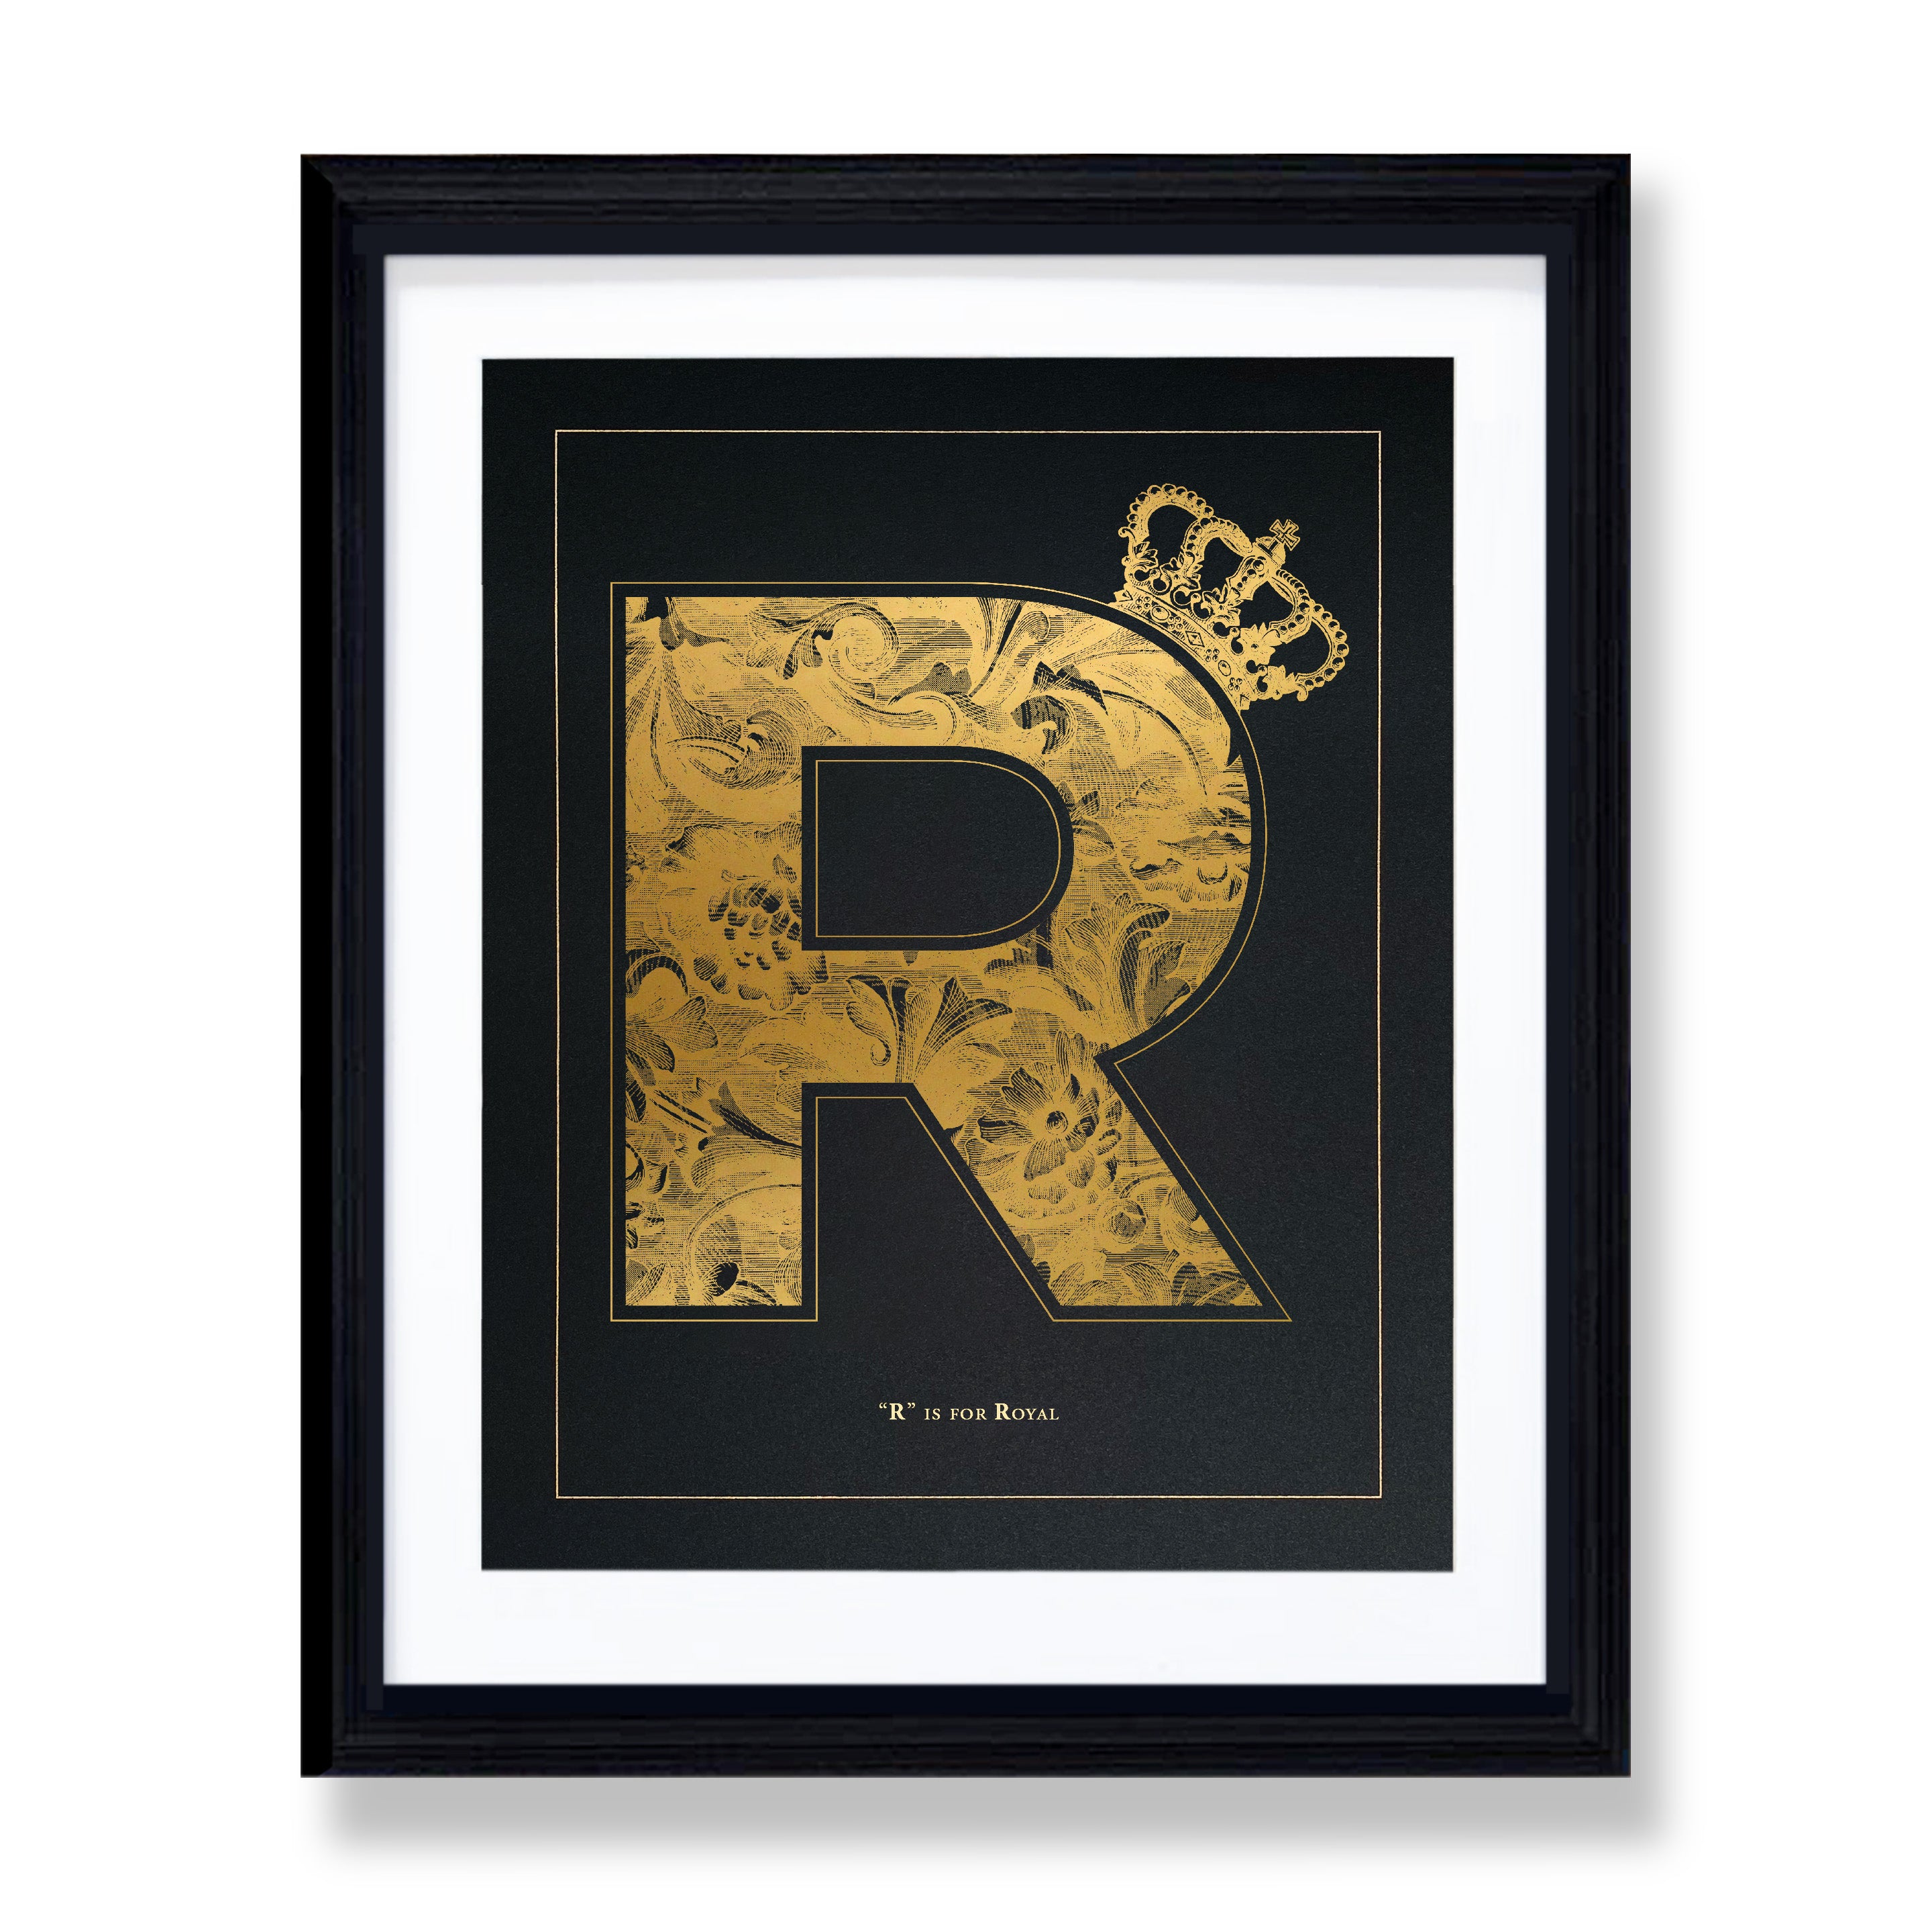 "R" is for Royal